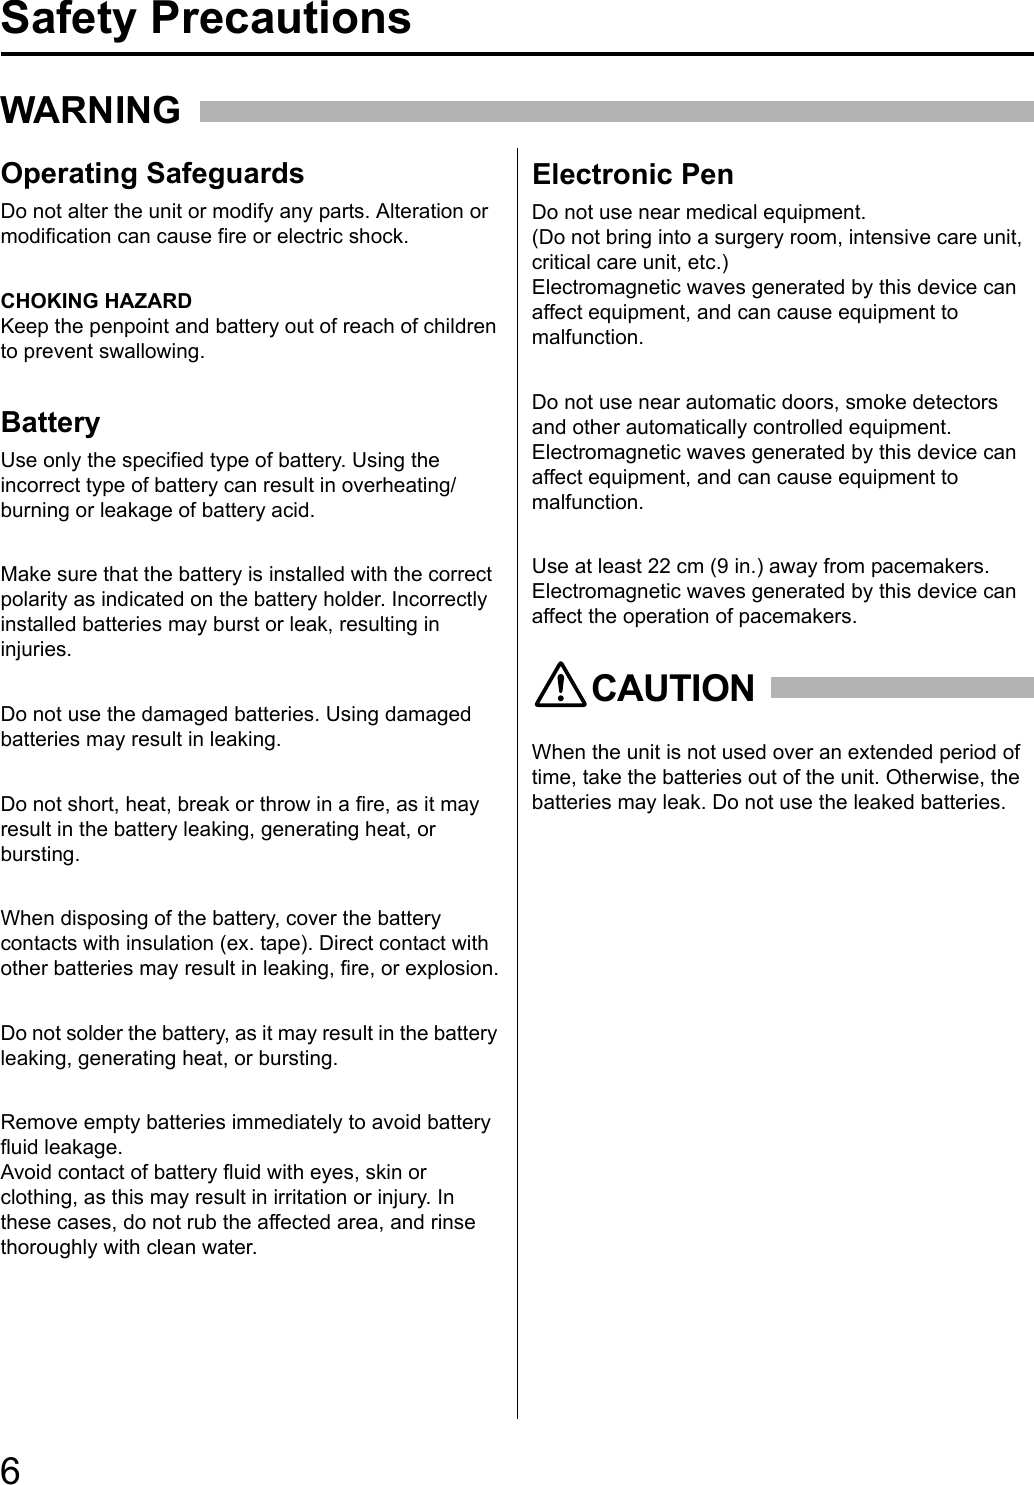 6For Your SafetyWARNINGOperating SafeguardsBatteryElectronic PenDo not alter the unit or modify any parts. Alteration or modification can cause fire or electric shock.CHOKING HAZARDKeep the penpoint and battery out of reach of children to prevent swallowing.Use only the specified type of battery. Using the incorrect type of battery can result in overheating/burning or leakage of battery acid.Make sure that the battery is installed with the correct polarity as indicated on the battery holder. Incorrectly installed batteries may burst or leak, resulting in injuries.Do not use the damaged batteries. Using damaged batteries may result in leaking.Do not short, heat, break or throw in a fire, as it may result in the battery leaking, generating heat, or bursting.When disposing of the battery, cover the battery contacts with insulation (ex. tape). Direct contact with other batteries may result in leaking, fire, or explosion.Do not solder the battery, as it may result in the battery leaking, generating heat, or bursting.Remove empty batteries immediately to avoid battery fluid leakage.Avoid contact of battery fluid with eyes, skin or clothing, as this may result in irritation or injury. In these cases, do not rub the affected area, and rinse thoroughly with clean water.Do not use near medical equipment.(Do not bring into a surgery room, intensive care unit, critical care unit, etc.) Electromagnetic waves generated by this device can affect equipment, and can cause equipment to malfunction.Do not use near automatic doors, smoke detectors and other automatically controlled equipment.Electromagnetic waves generated by this device can affect equipment, and can cause equipment to malfunction.Use at least 22 cm (9 in.) away from pacemakers.Electromagnetic waves generated by this device can affect the operation of pacemakers.When the unit is not used over an extended period of time, take the batteries out of the unit. Otherwise, the batteries may leak. Do not use the leaked batteries.CAUTIONSafety Precautions